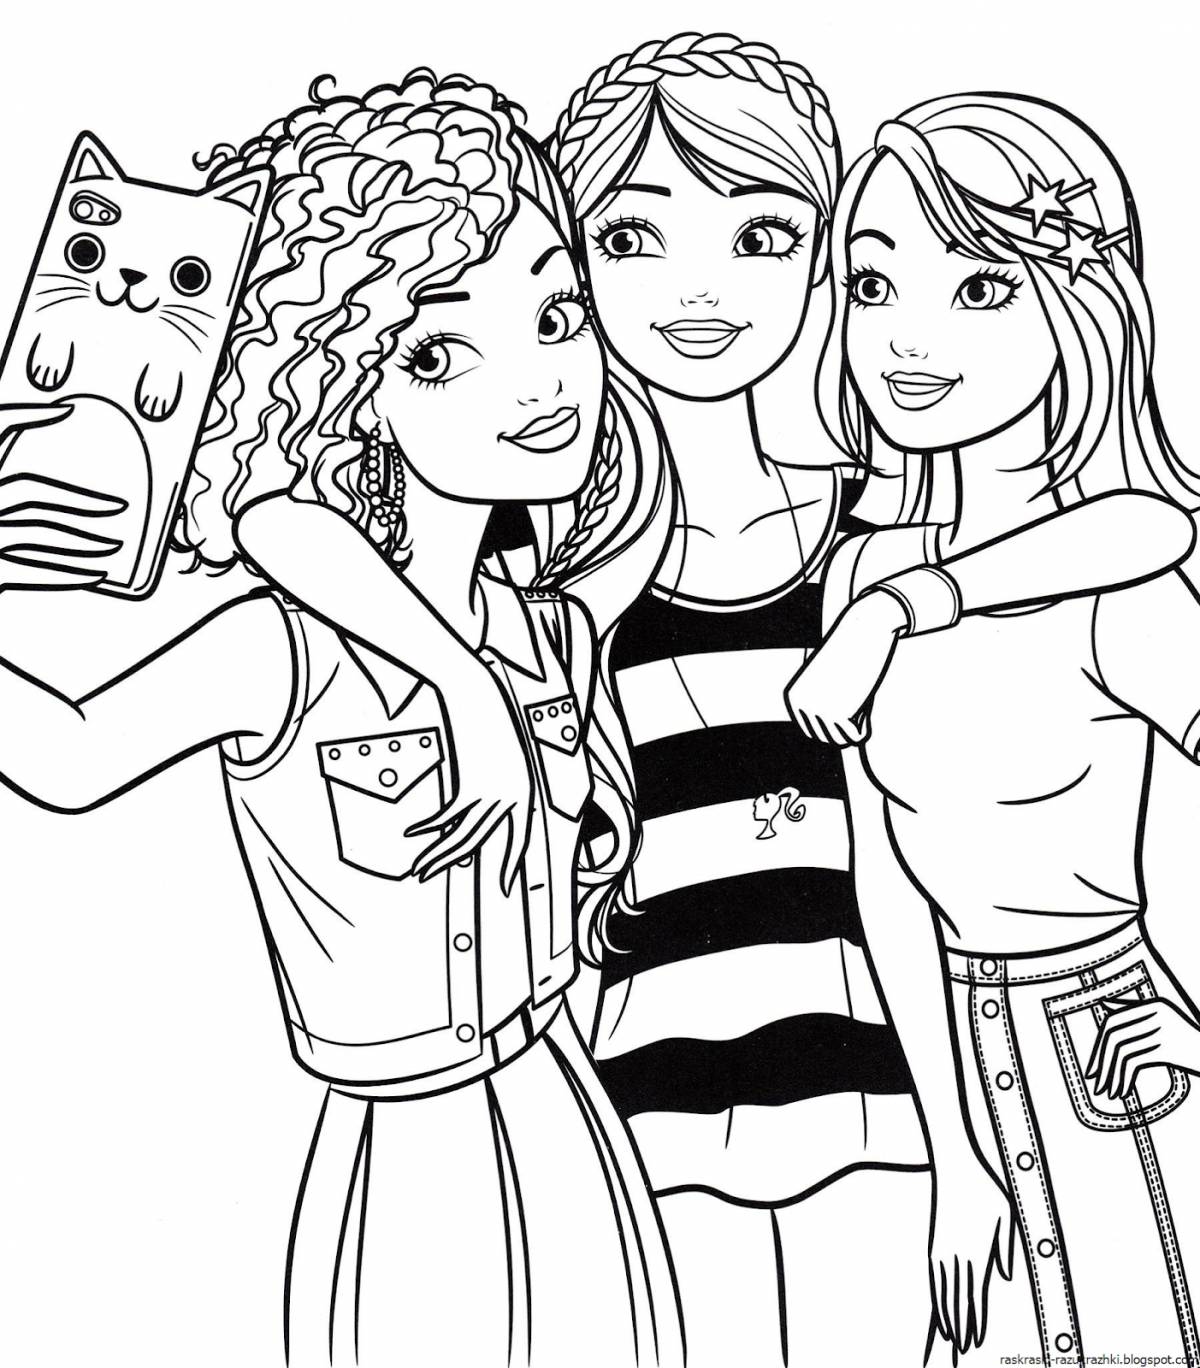 Adorable coloring book for 13 year old girls